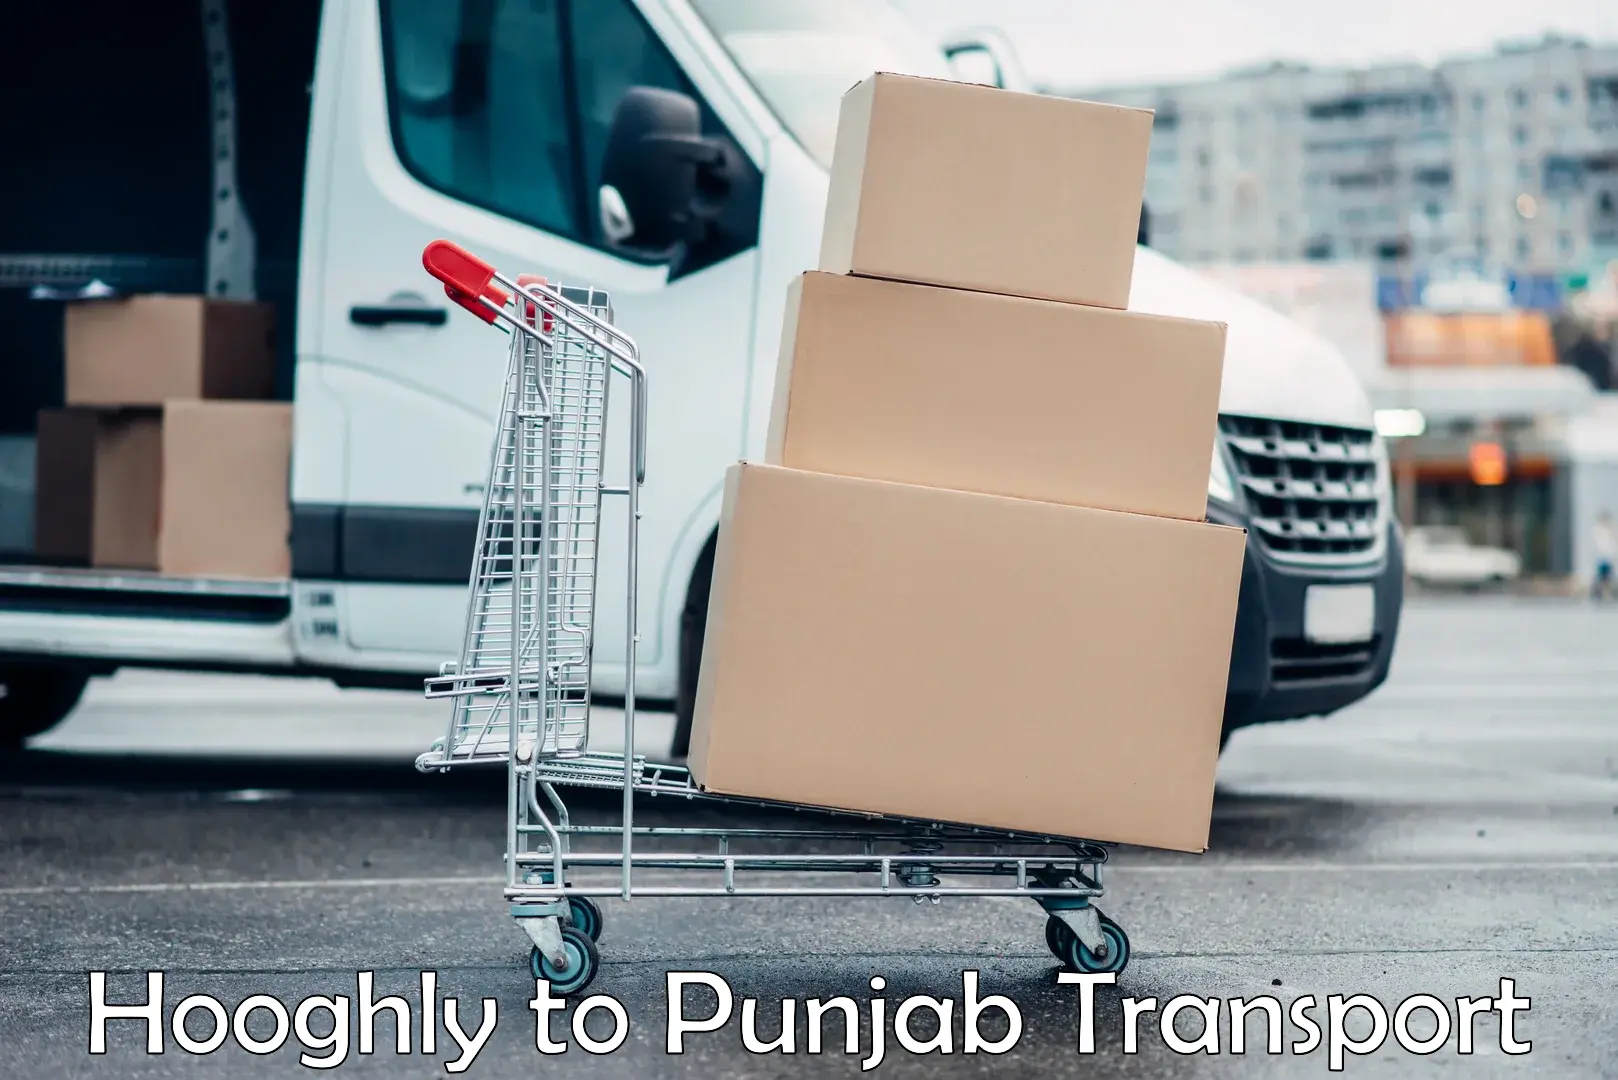 Daily transport service Hooghly to Rampura Phul